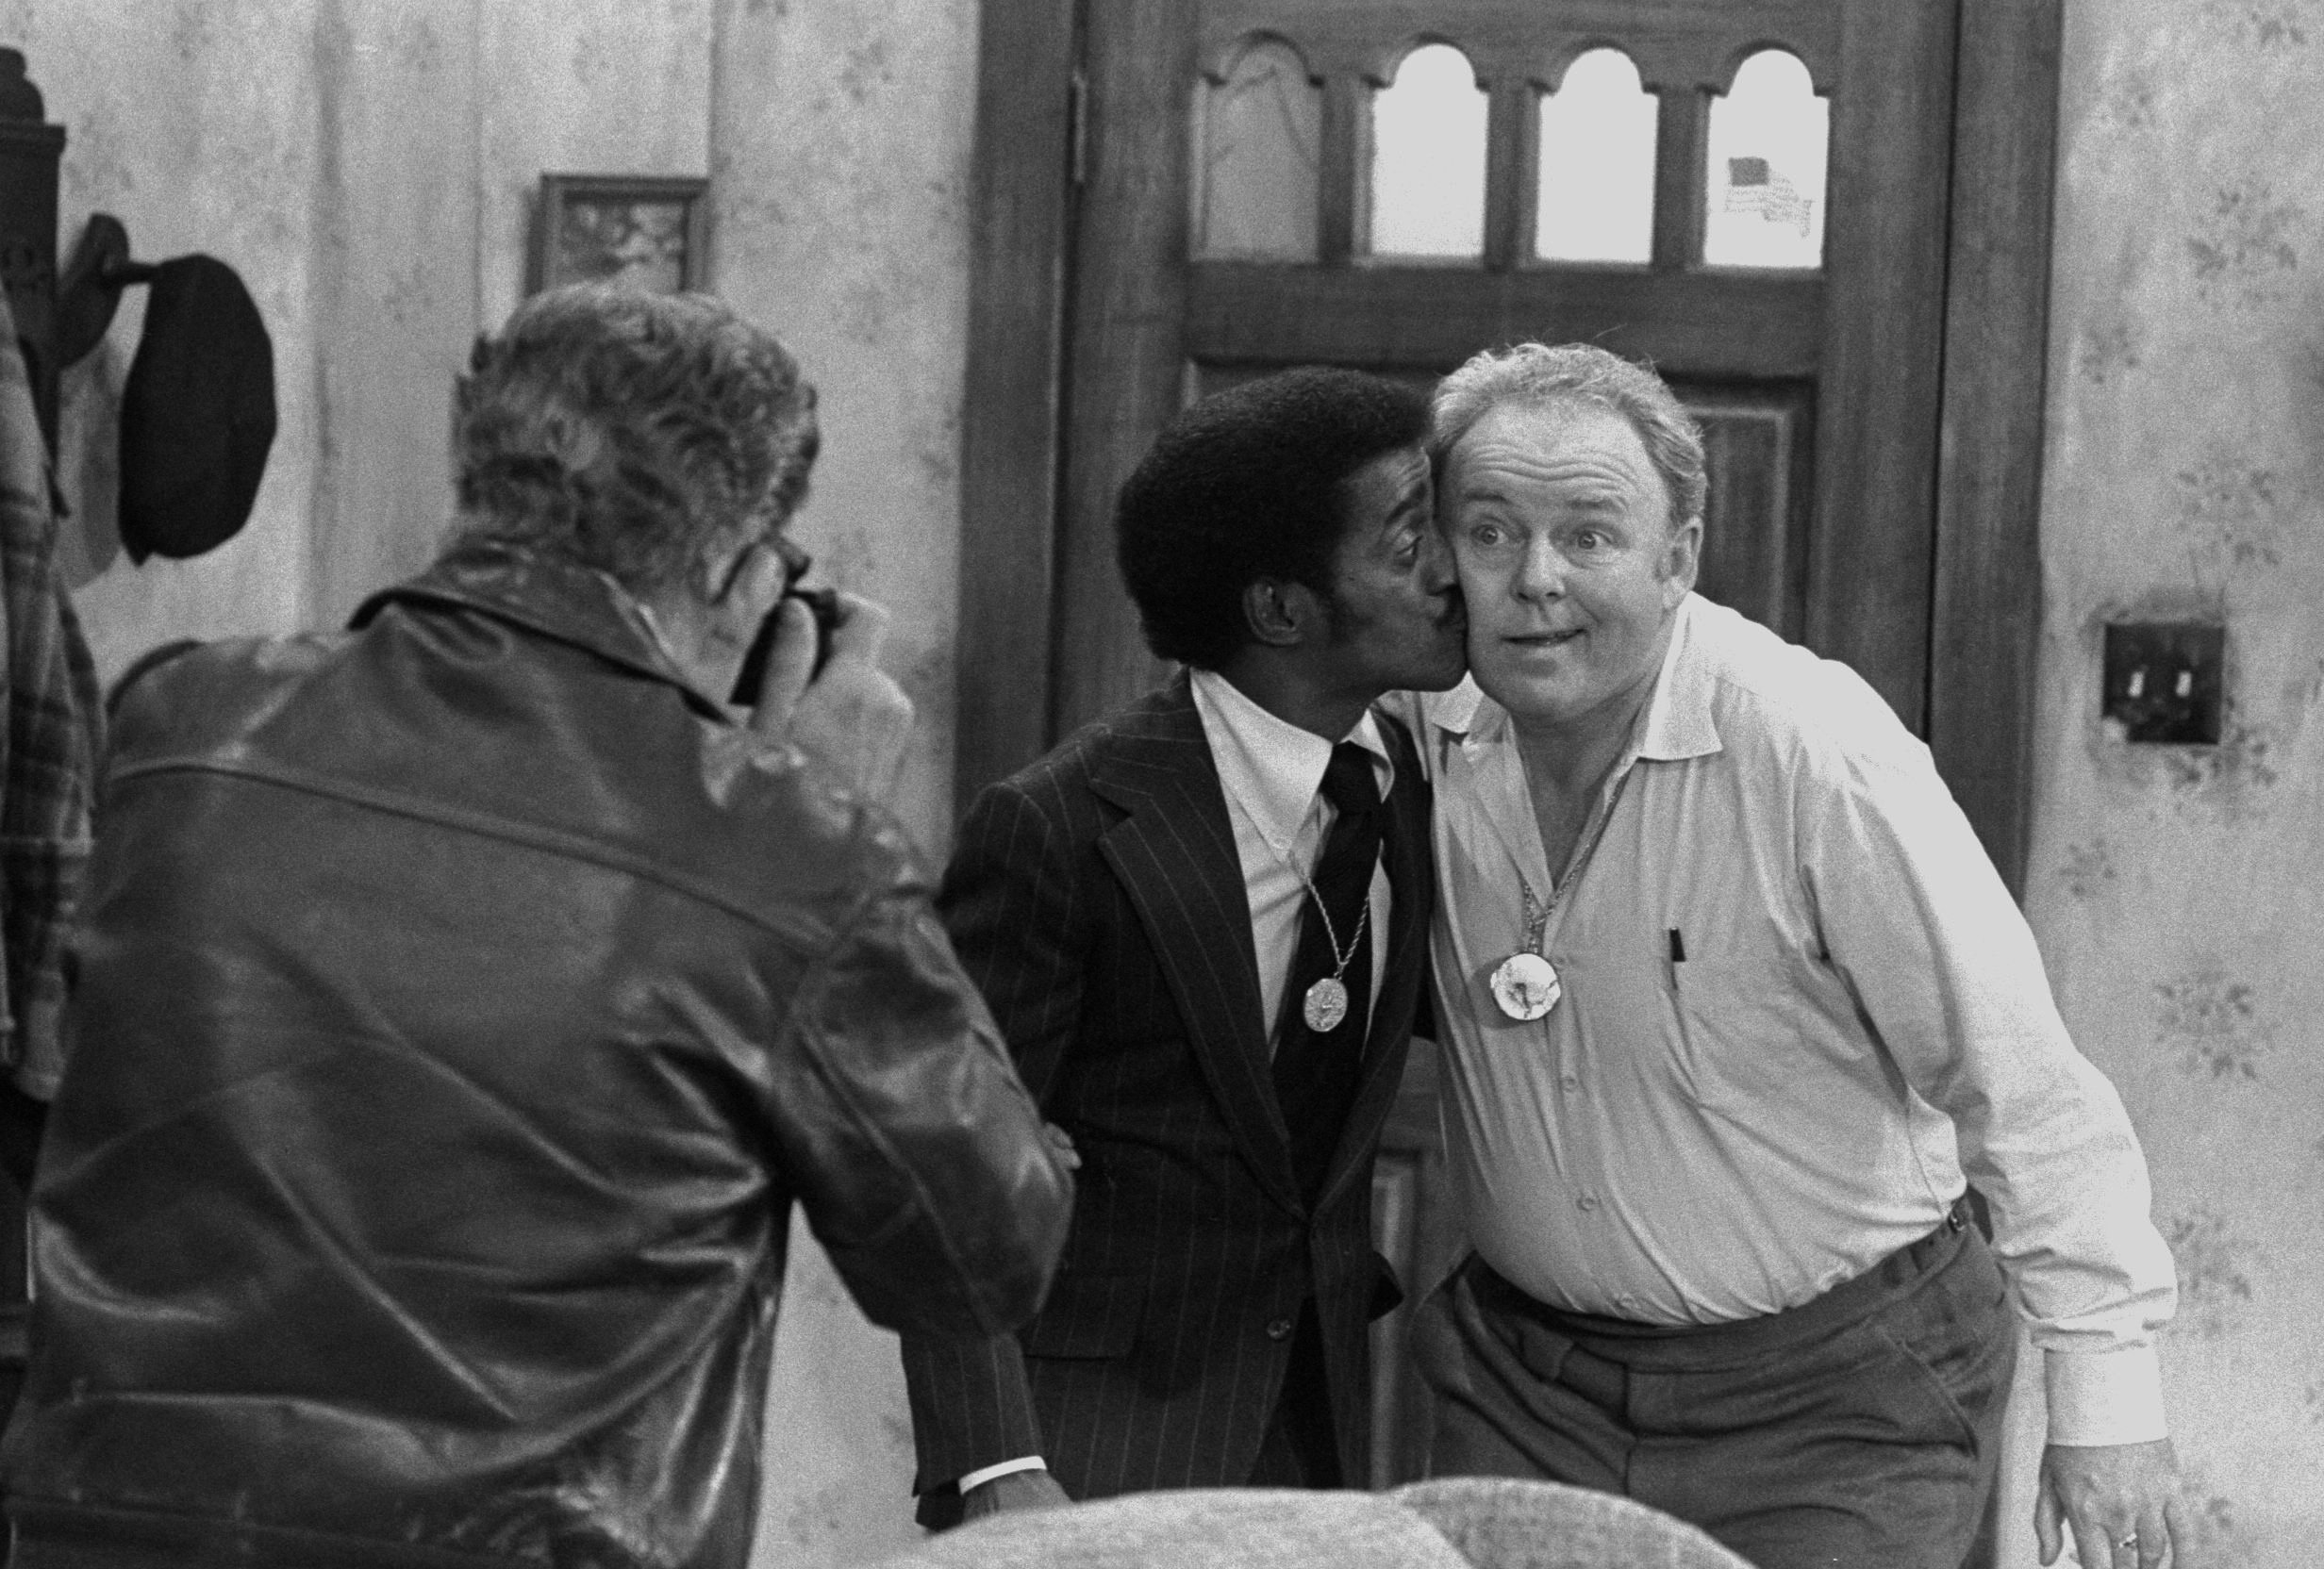 'All in the Family' episode 'Sammy's Visit' featuring (at right) Carroll O'Connor as Archie Bunker and (left) entertainer Sammy Davis Jr. (as himself), 1972